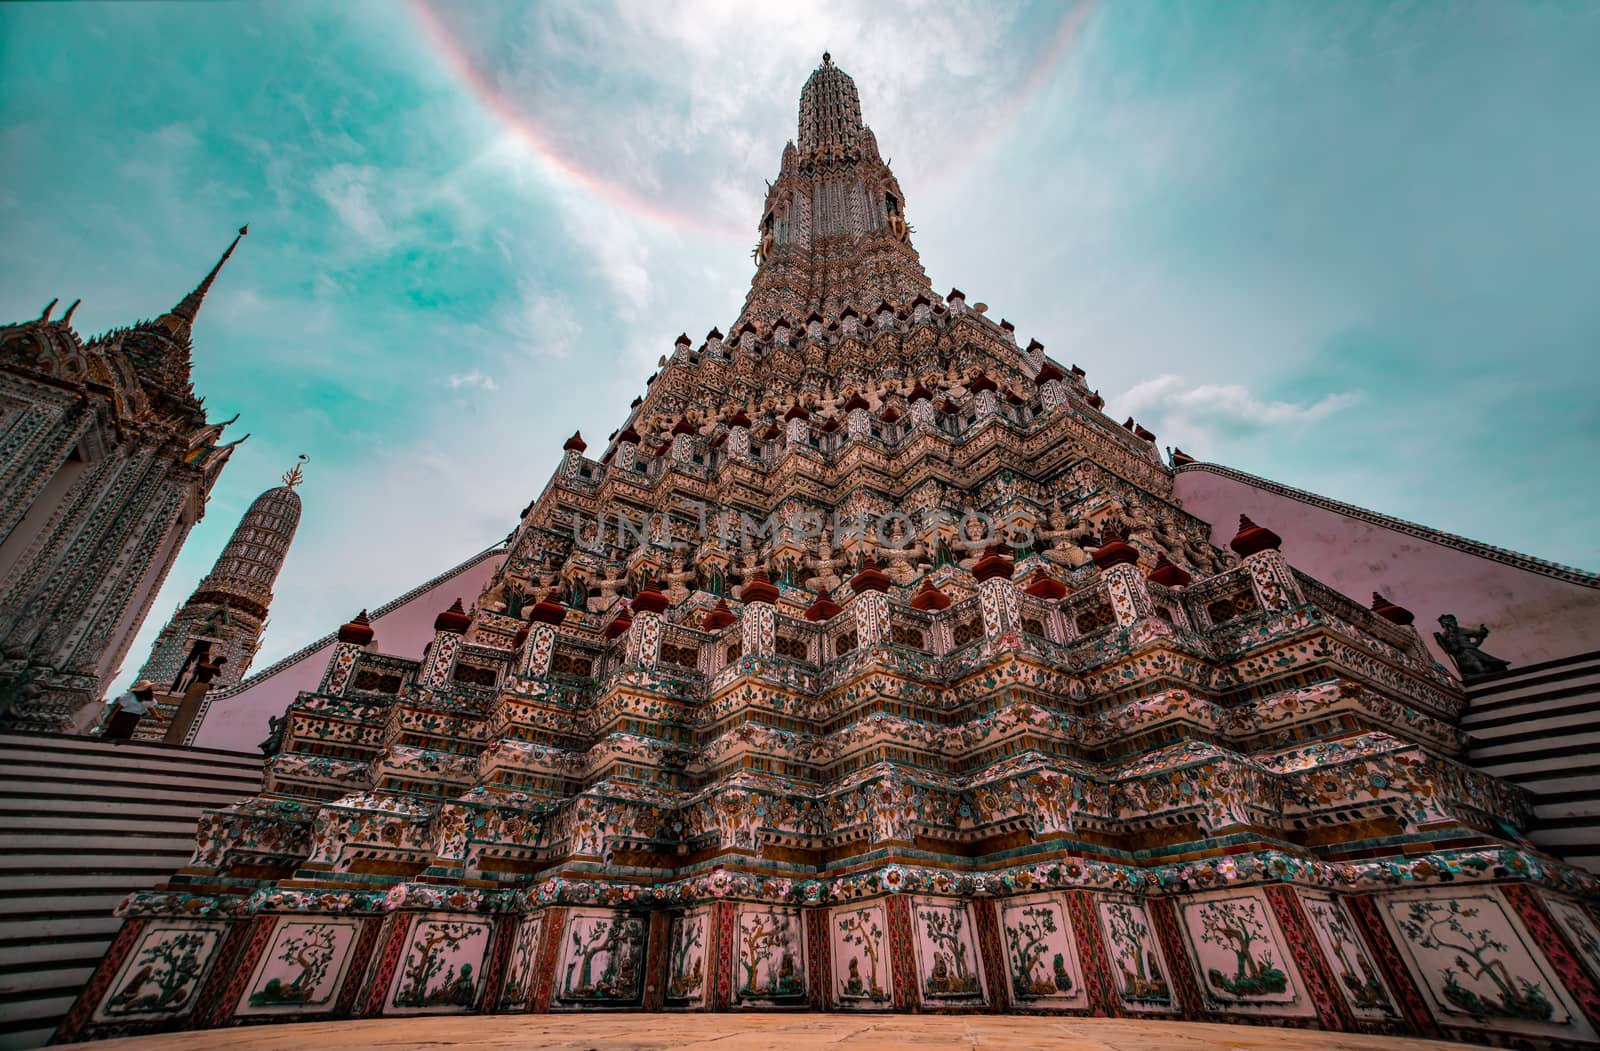 Wat Arun is famous place for tourists at Thailand by Buttus_casso